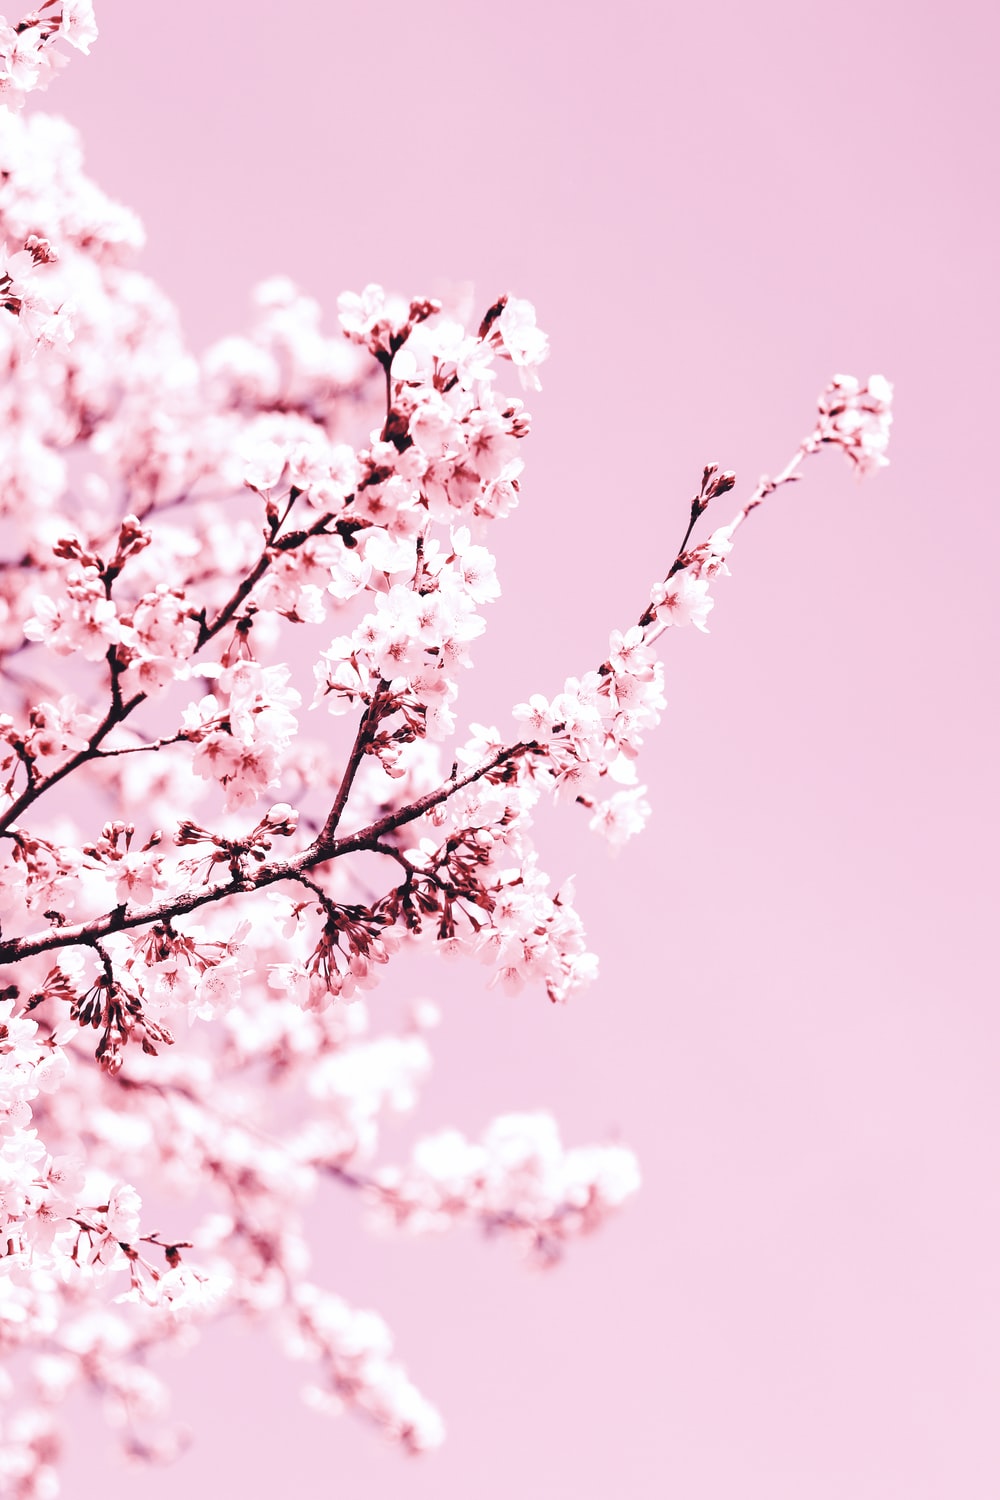 Blossom tree aesthetic wallpapers